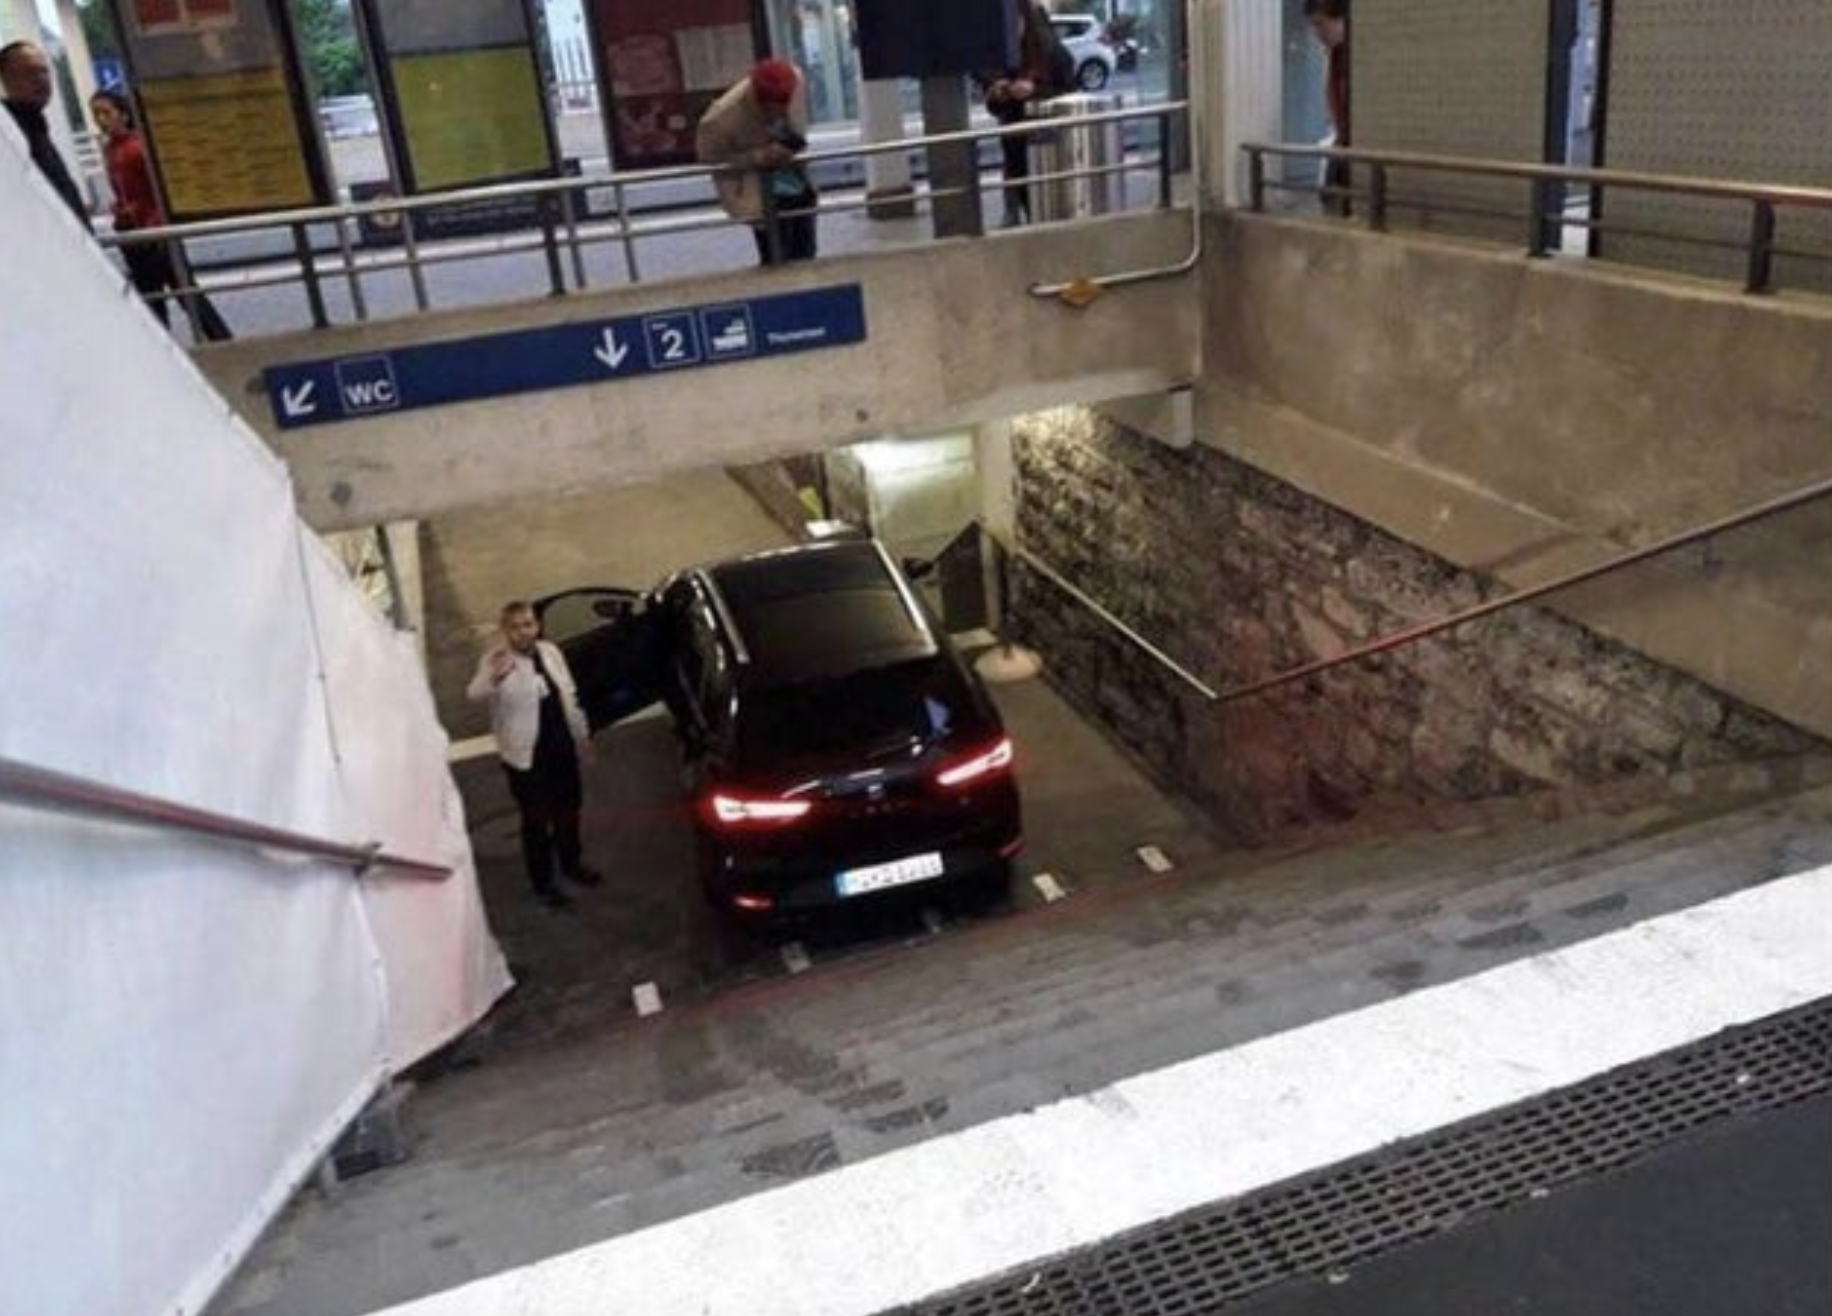 “He thought it was an entrance to a parking garage.”